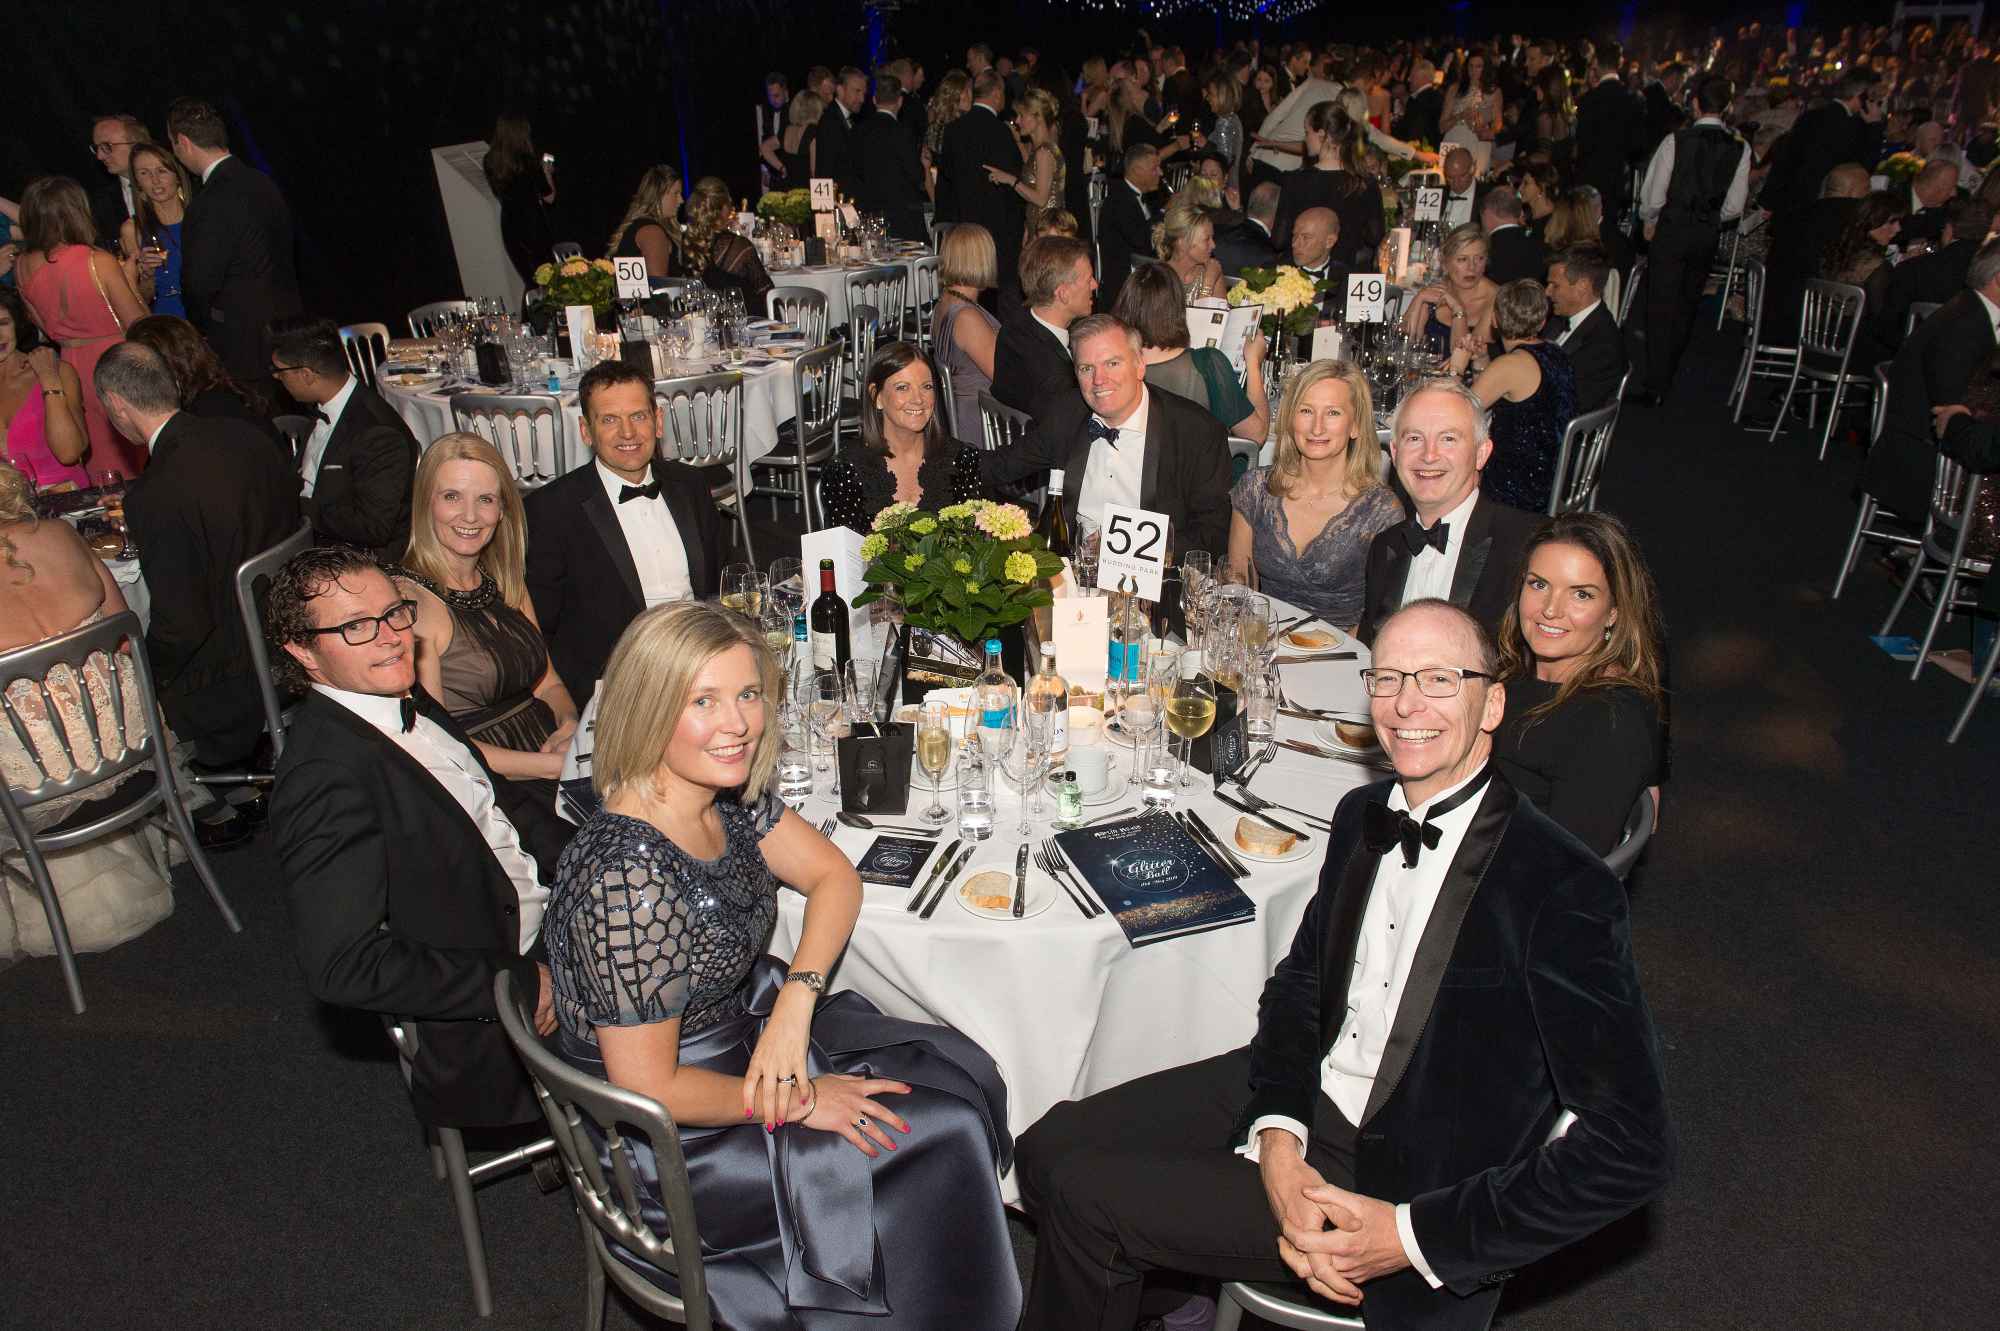 Guests at last year’s Glitter Ball, which takes place as an online event in 2020